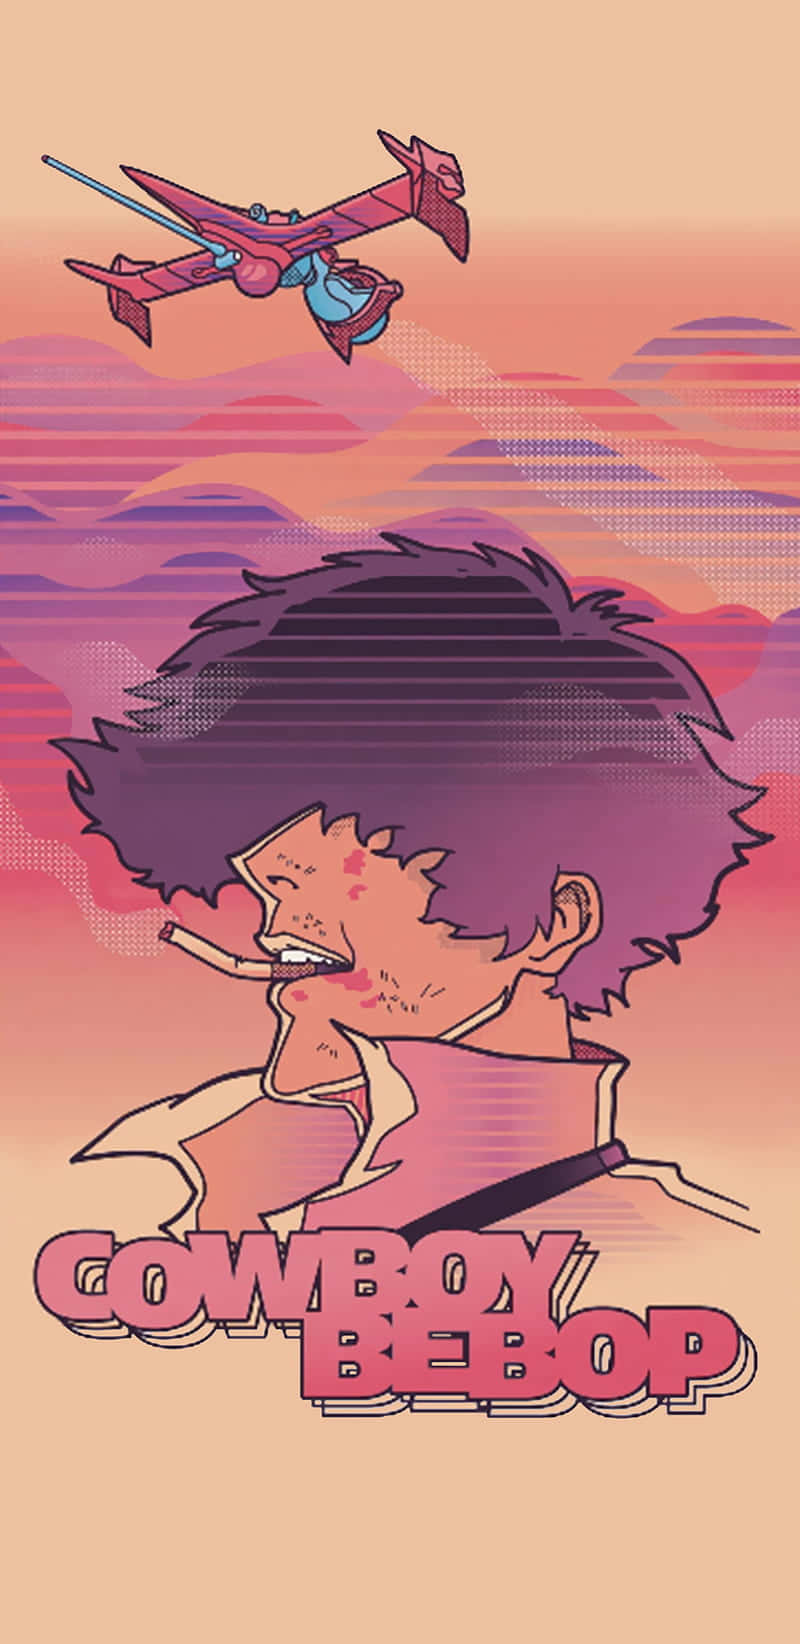 Spike Spiegel from Cowboy Bebop on your Iphone Wallpaper